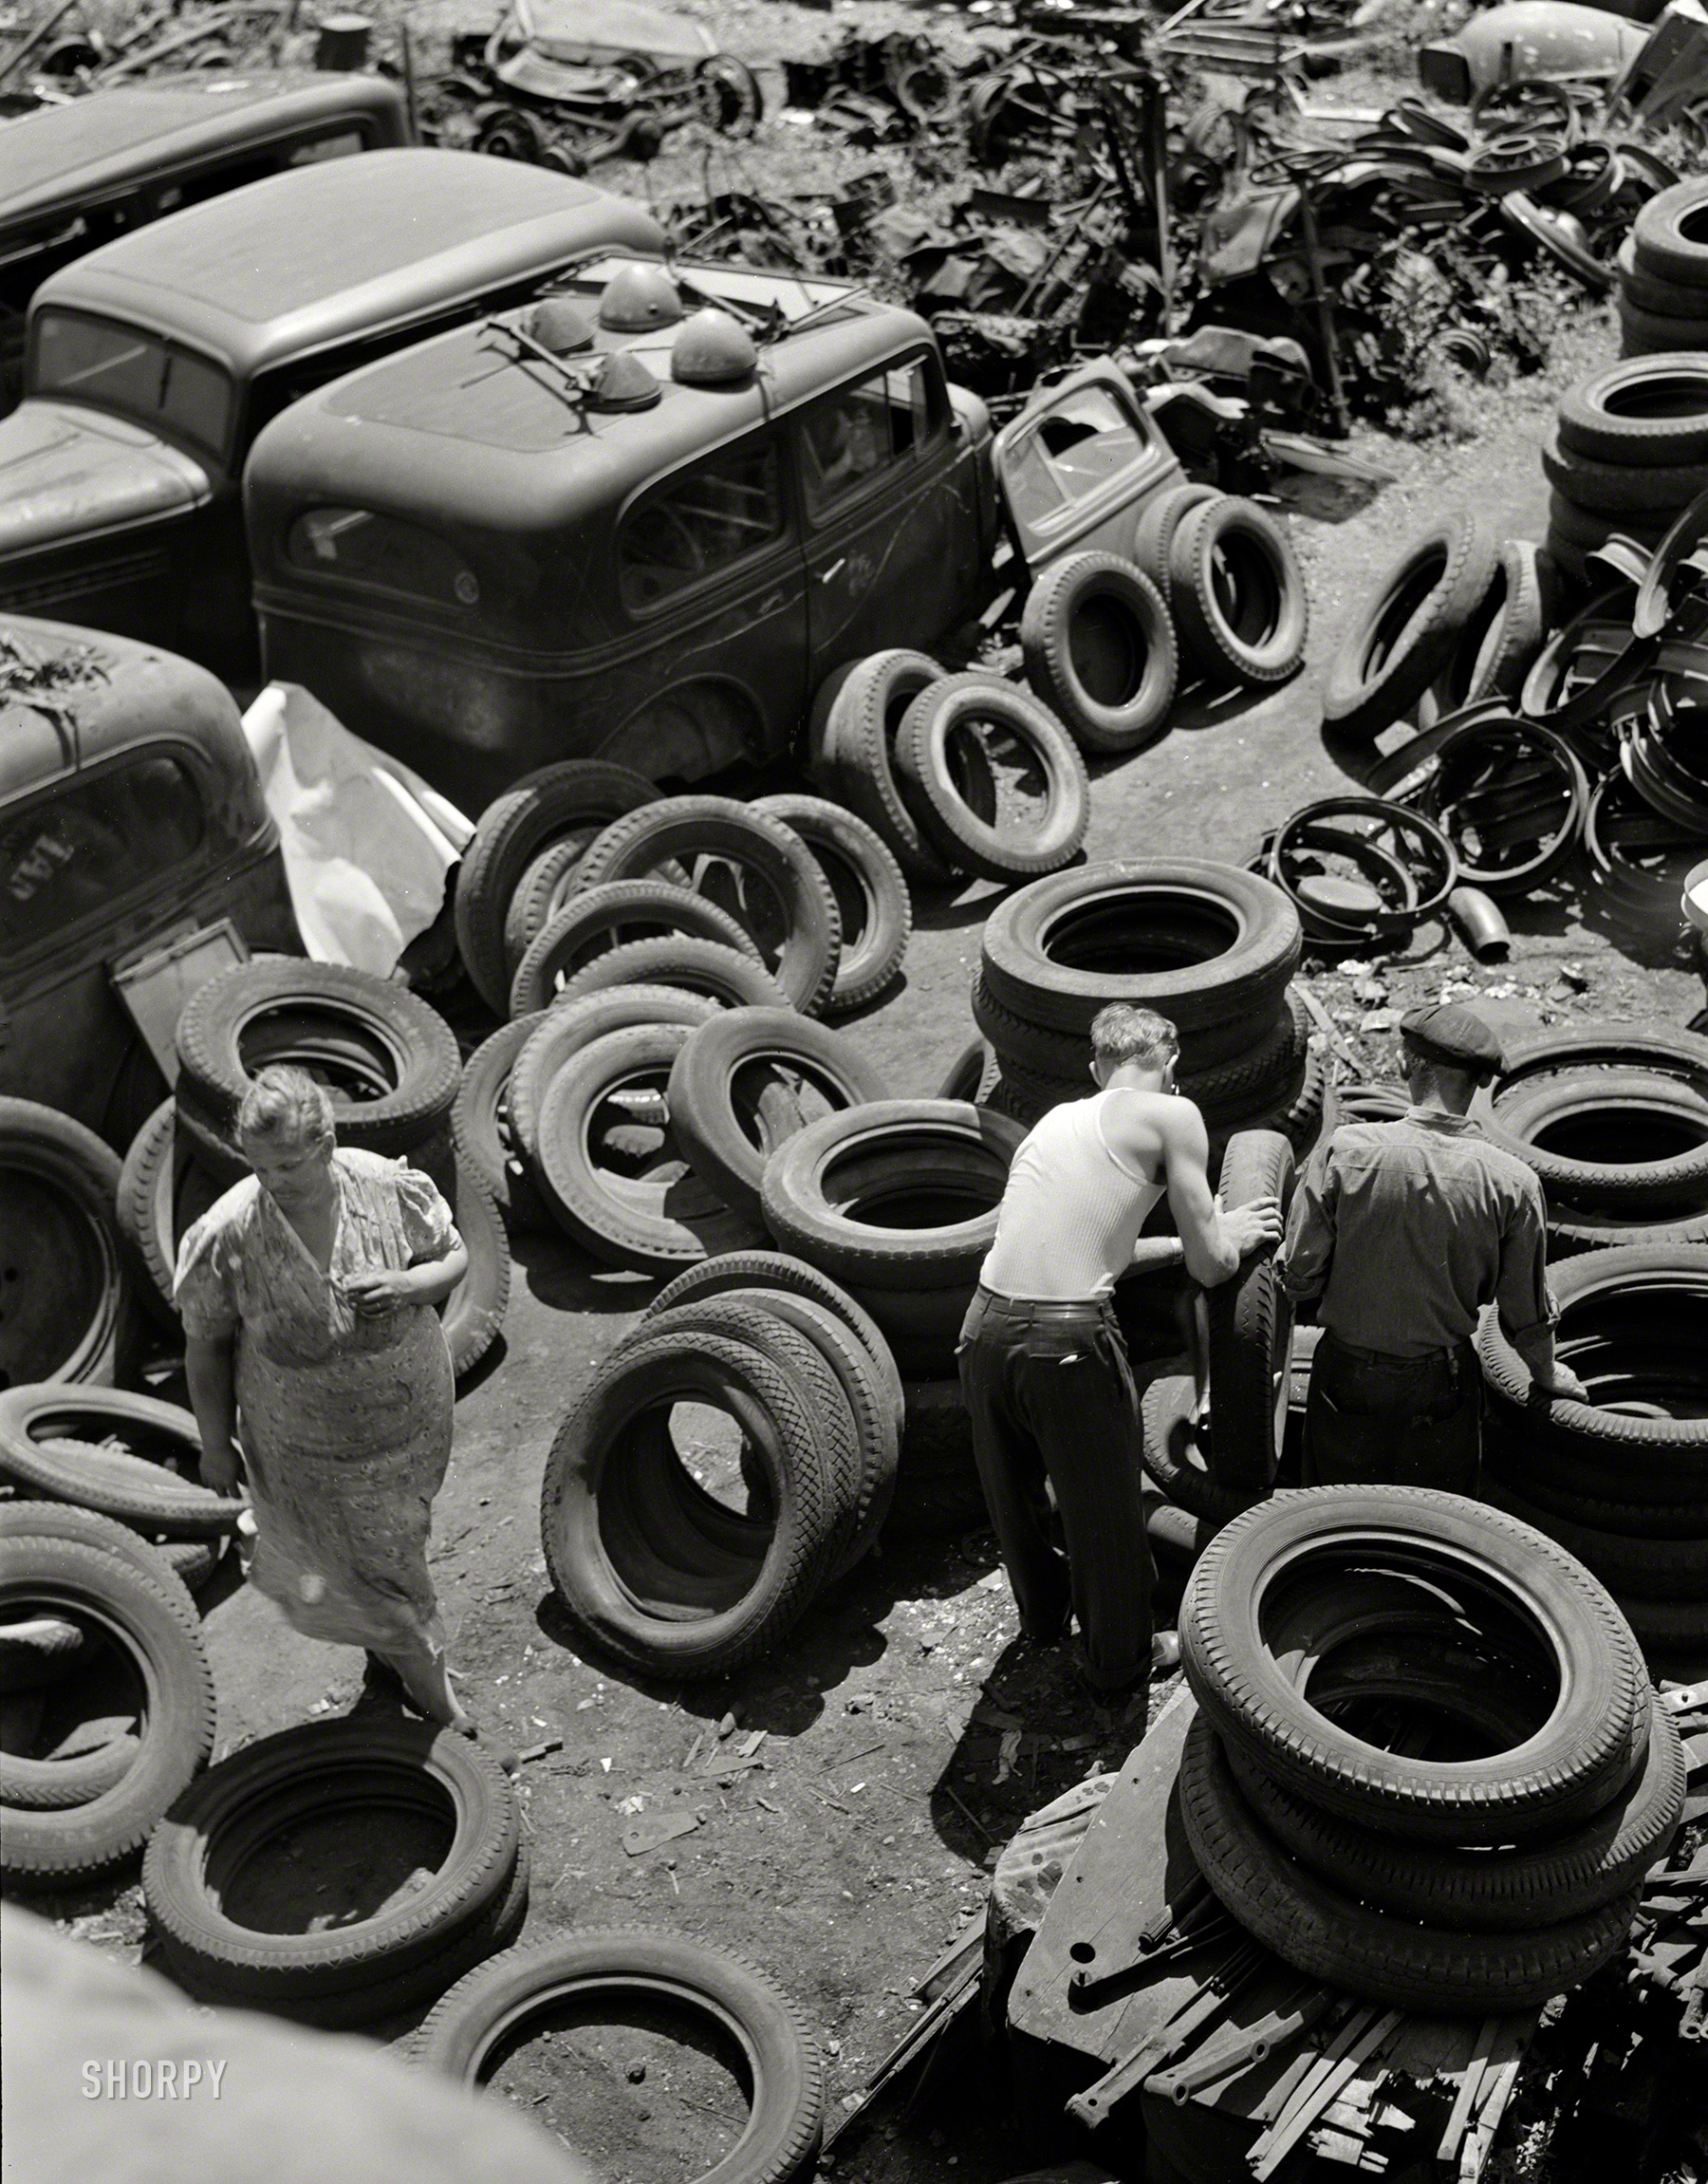 July 1942. "Salvage. Chicago automobile graveyard. Idle scrap: It belongs in the scrap. Covering well over an acre, this automobile graveyard in Chicago holds tons of vital scrap metal and rubber for which Uncle Sam has urgent need in the manufacture of armaments and other war materials." 4x5 inch nitrate negative by Ann Rosener for the Office of War Information. View full size.